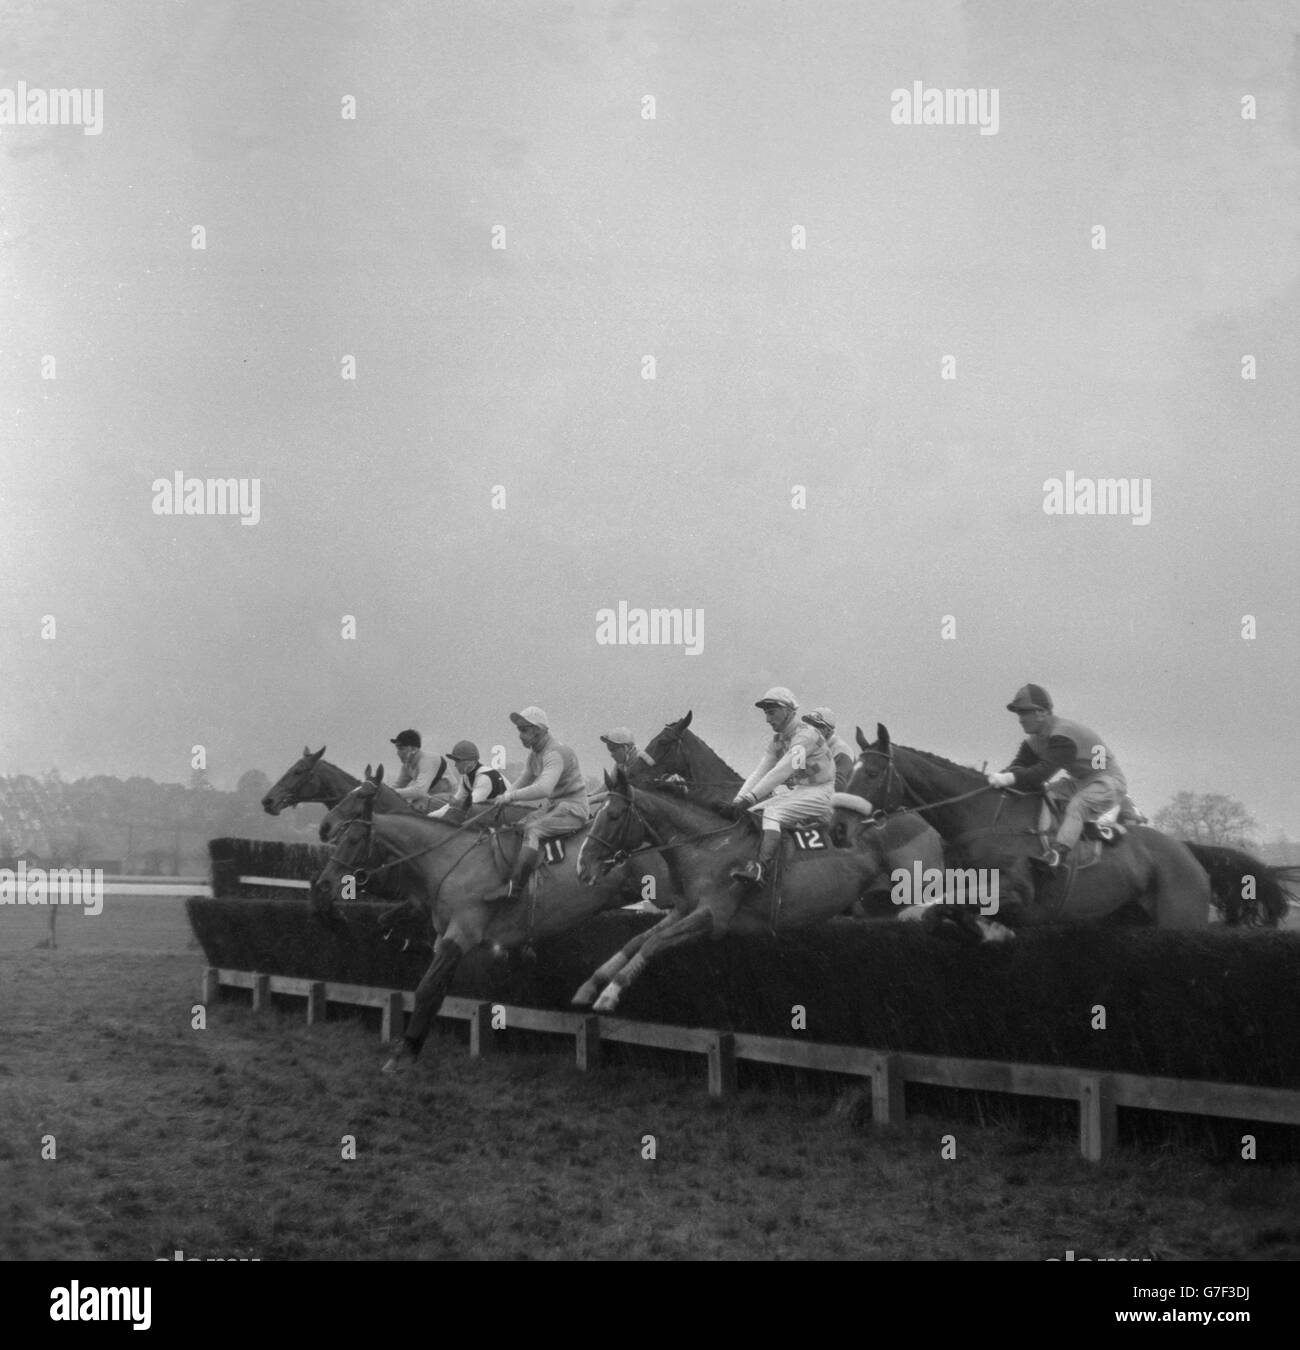 Taking the first fence in the Hennessy Cognac Gold Cup, won by the Duchess of Westminster's Arkle (extreme left) at Newbury. (l-r) Arkle, ridden by Pat Taaffe, Mill House (G.W. Robinson), Vultrix (S. Mellor, No 11), Ferry Boat (T. M. Jones, No 12) and Hoodwinked (P. Buckley). Ferry Boat finished second with The Rip third. Stock Photo